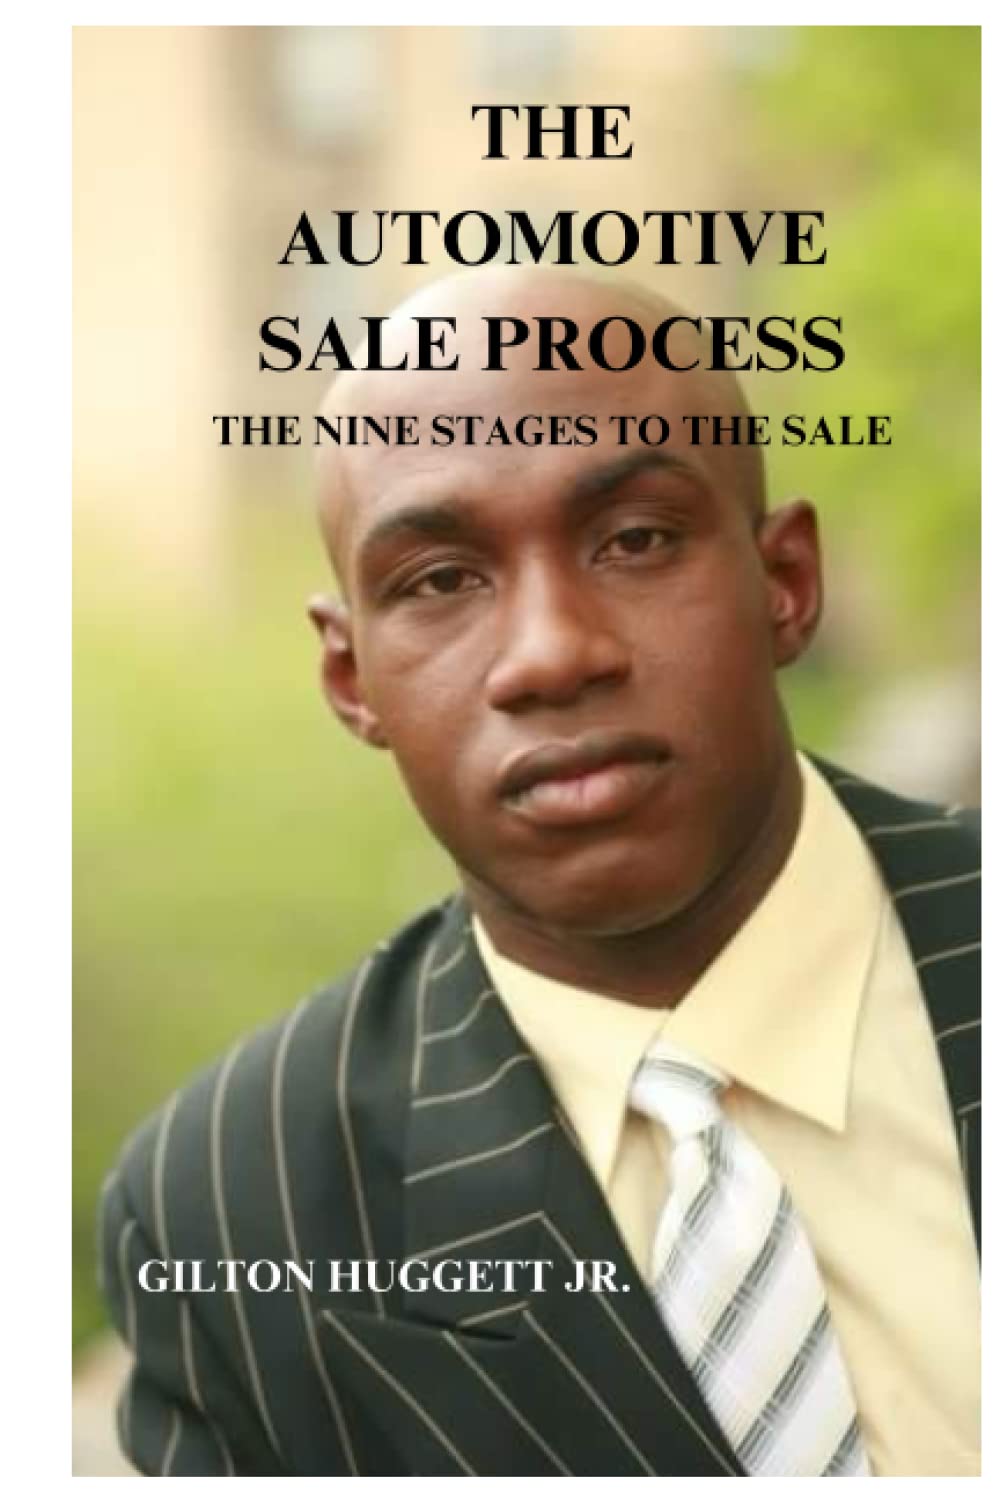 The Automotive Sale Process: The nine stages to the sale.